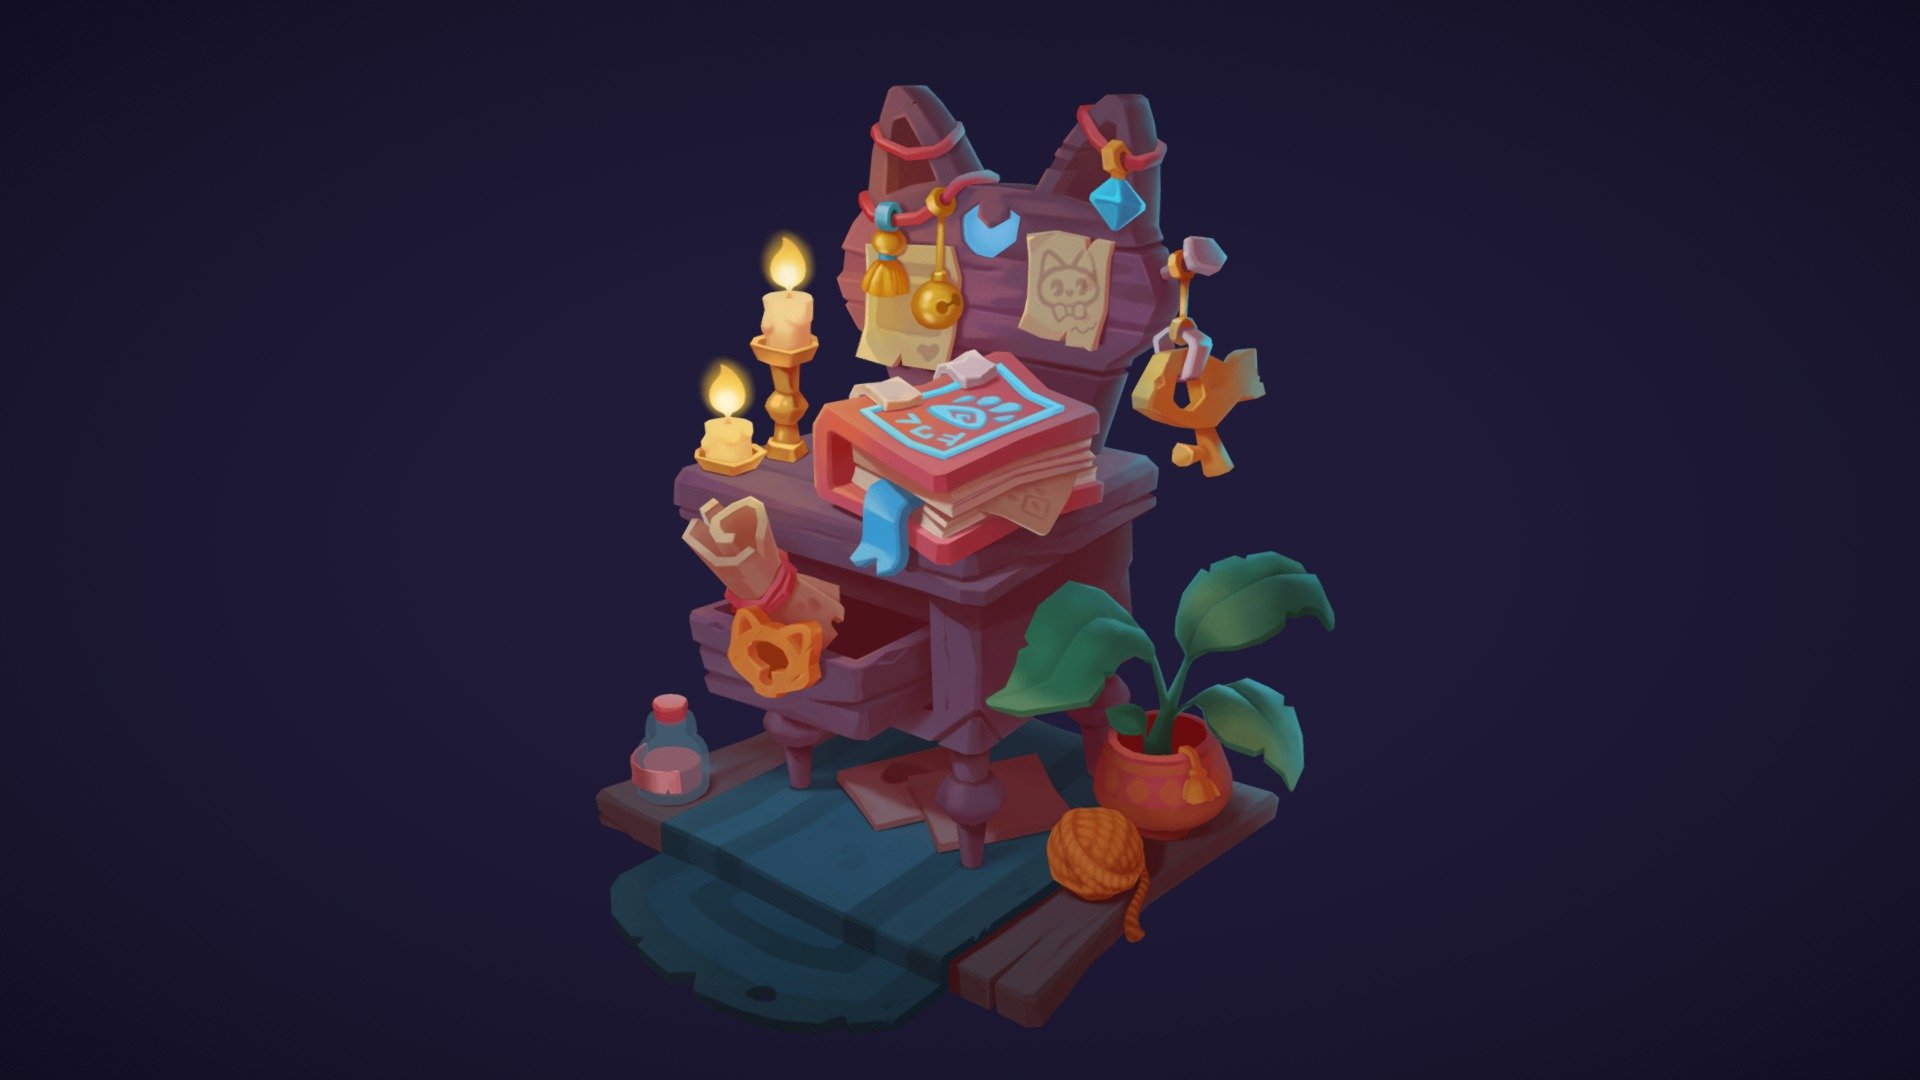 First time using 3D coat to paint in this style.

Concept by Jamilya Bukrina. https://www.artstation.com/artwork/oAkNVq - Cat Wizard Table - 3D model by fenite 3d model